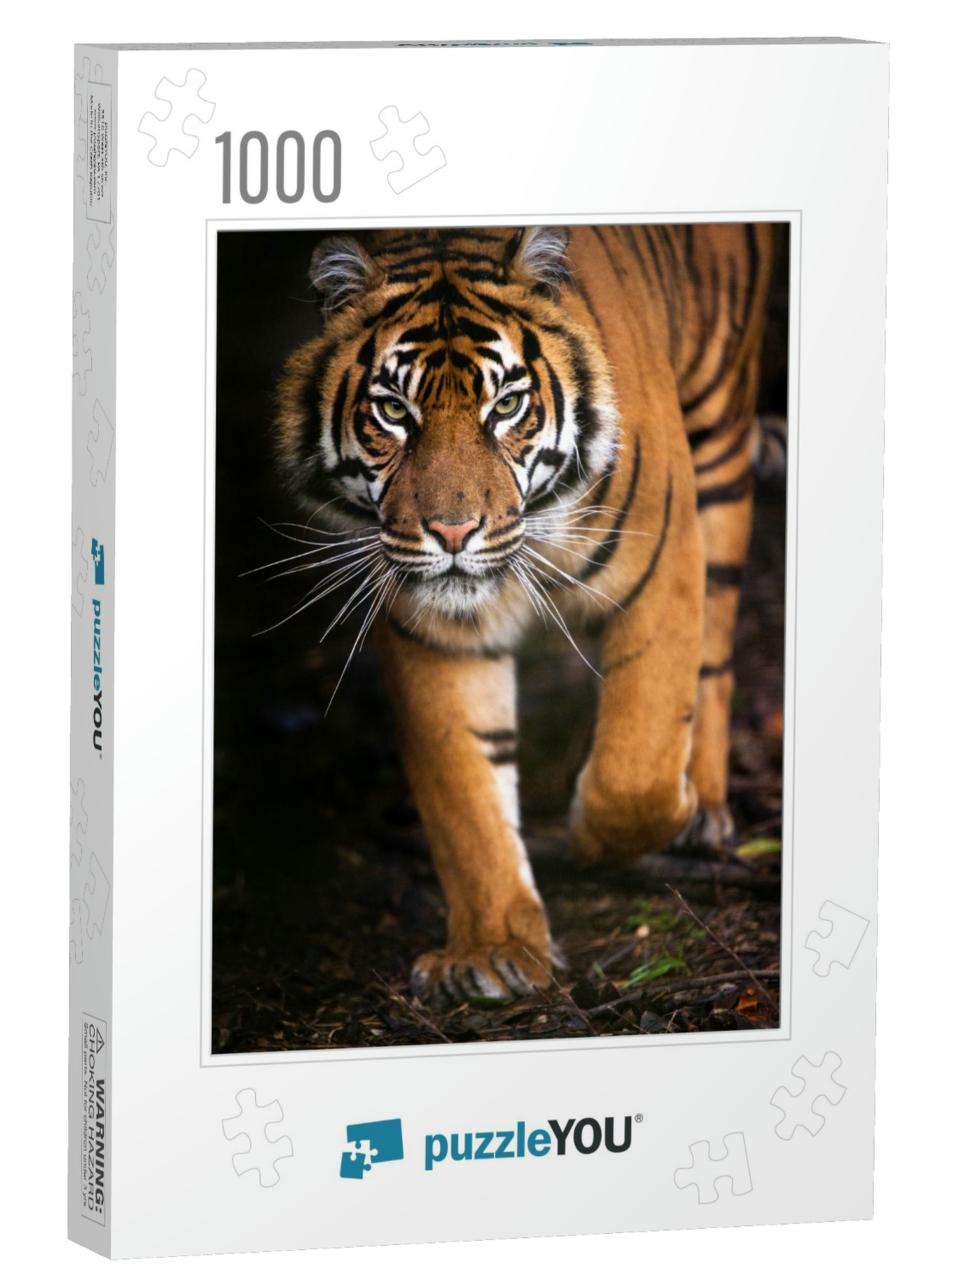 Young Sumatran Tiger Walking Out of Shadow/Tiger... Jigsaw Puzzle with 1000 pieces